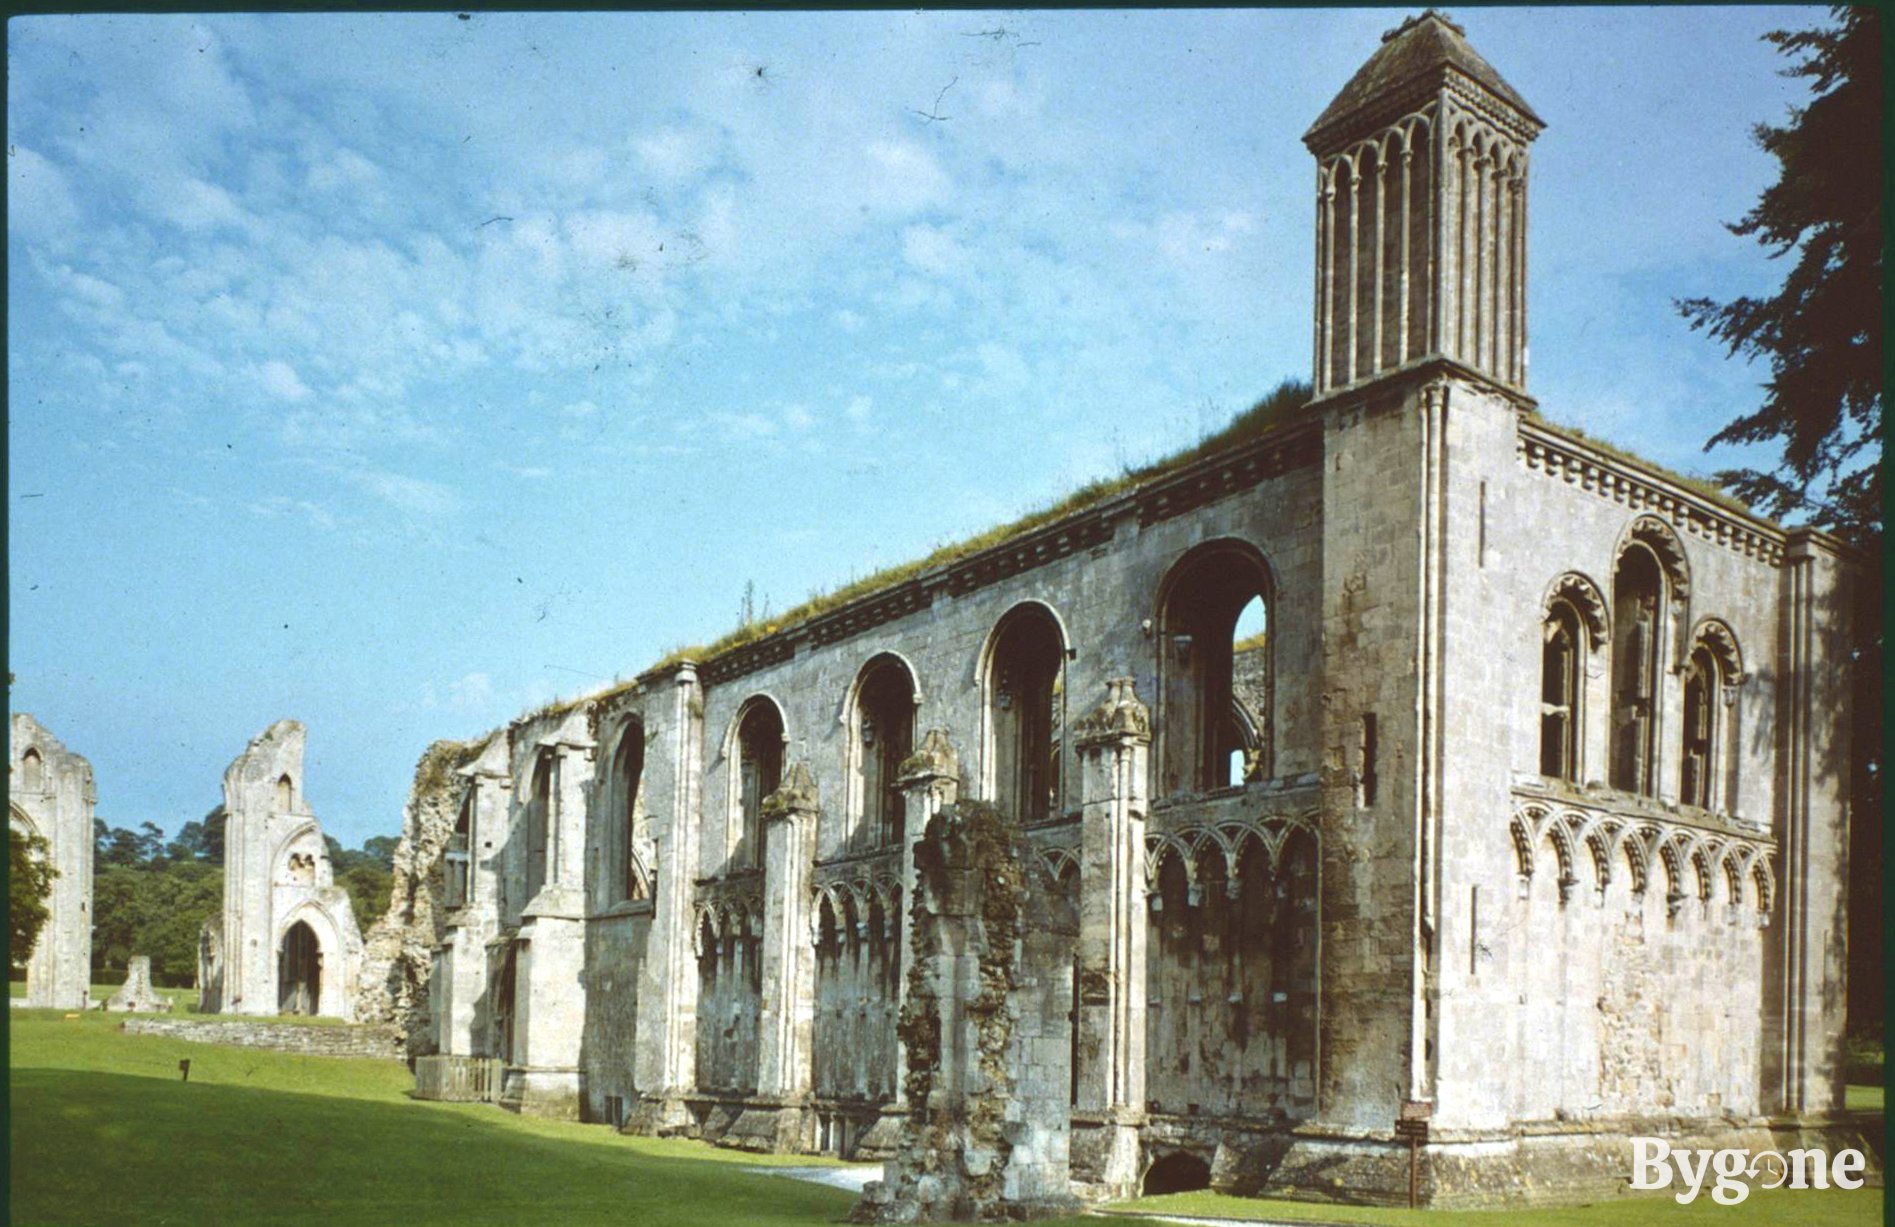 Beautiful stone ruins of an abbey in a green field on a sunny day, with arched windows and mossy grass growing on parts of its roof. A low wall leads to more monolith ruins with arches standing nearby in the distance.